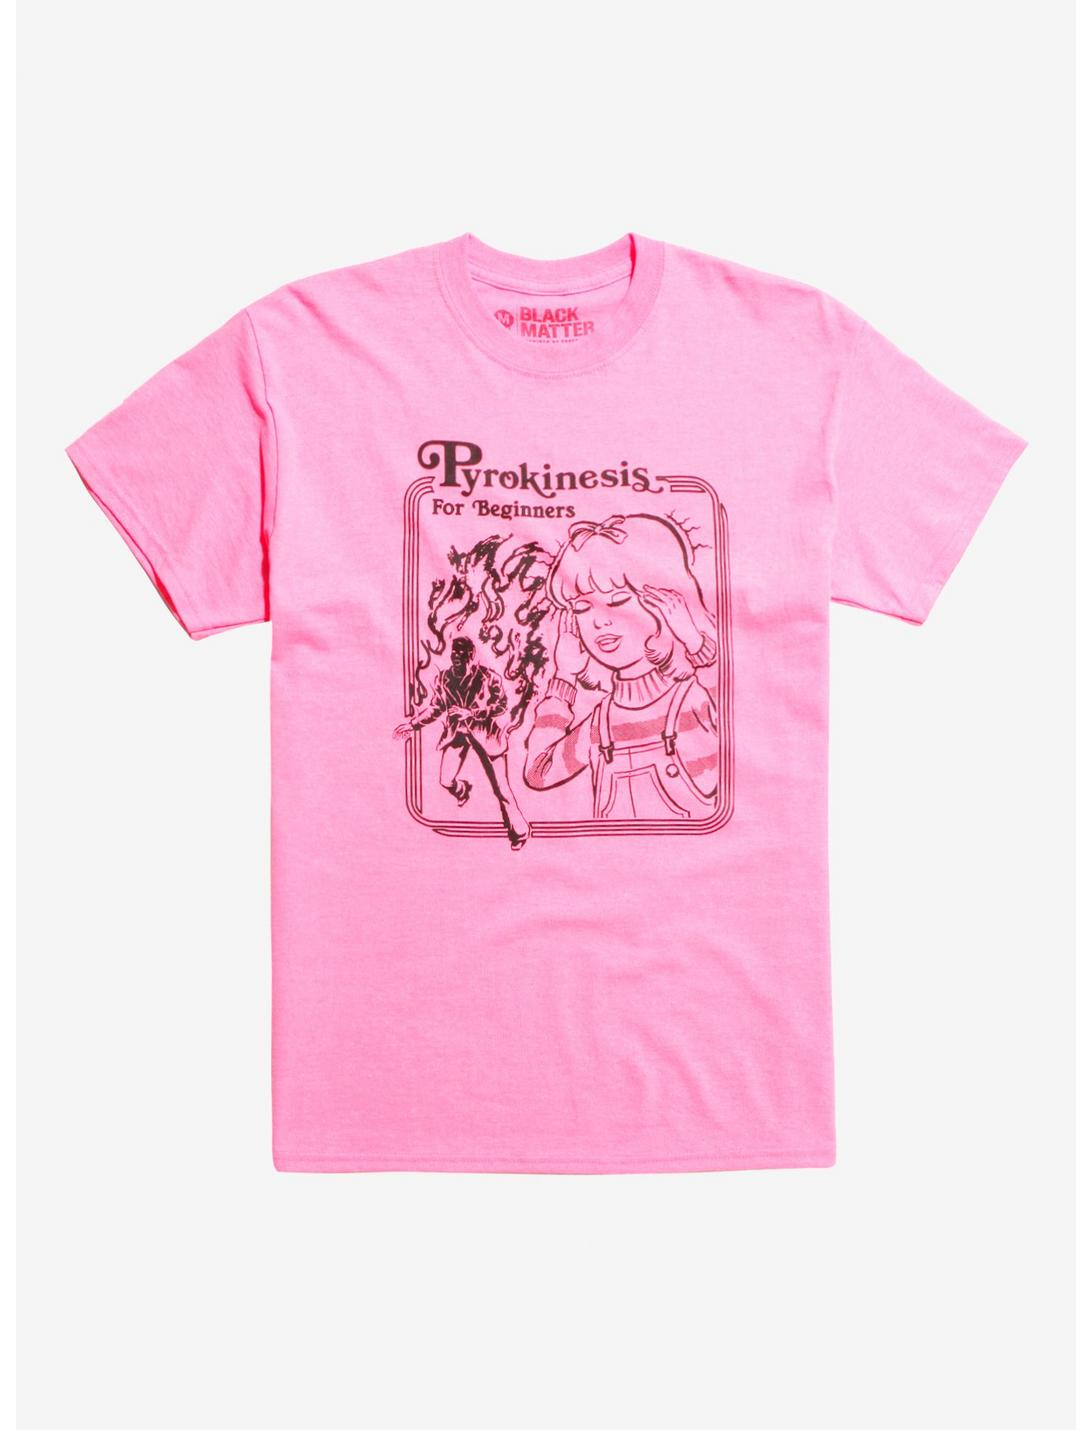 Pyrokinesis For Beginners Neon Pink T-Shirt By Steven Rhodes Hot Topic Exclusive, NEON PINK, hi-res